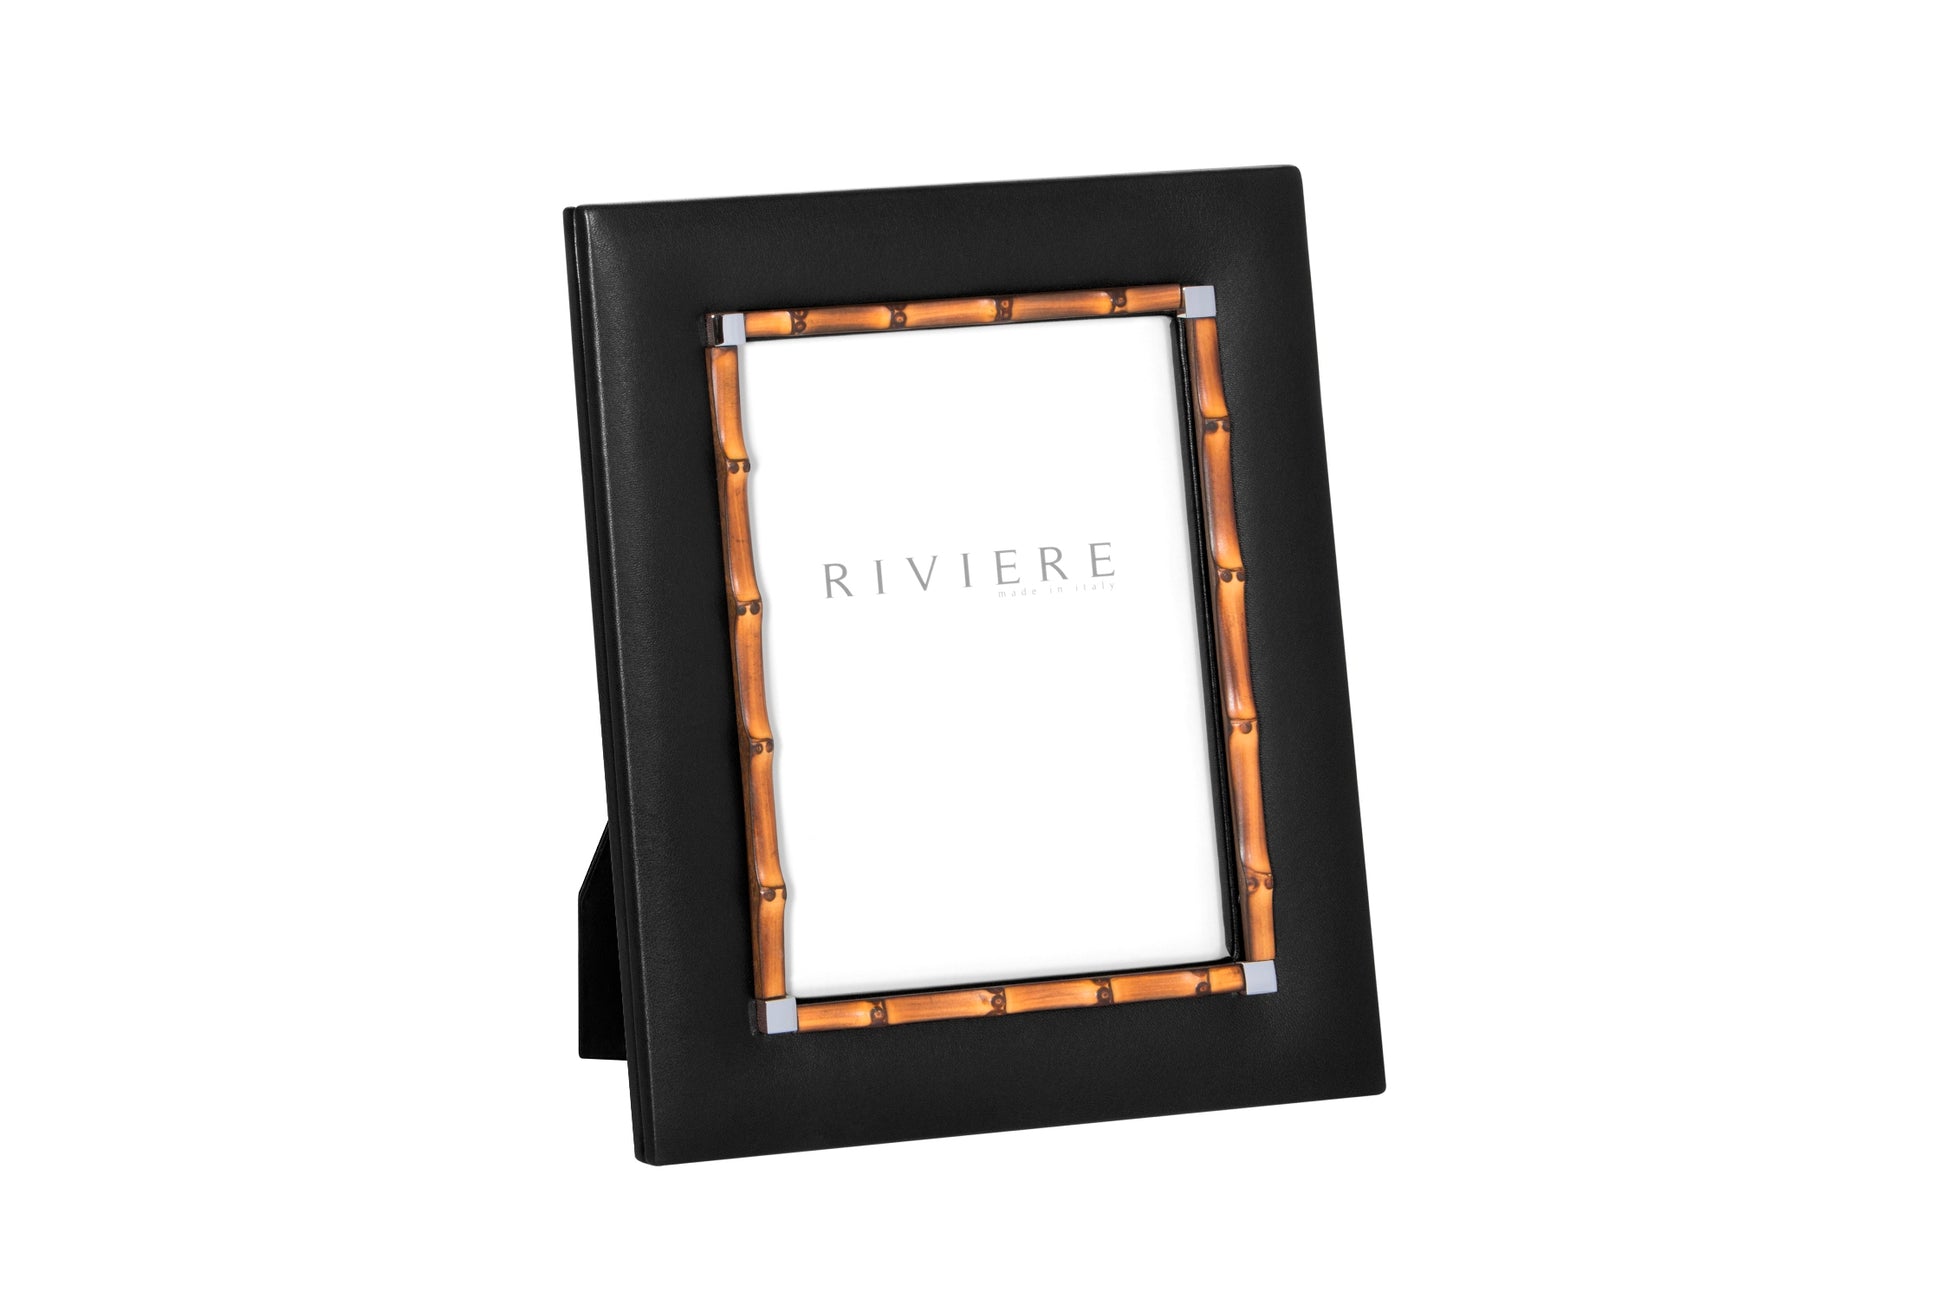 Riviere Bice Leather Picture Frame With Bamboo Trim & Chrome Metal Details | Sleek Leather Frame Accented with Bamboo Trim | Chrome Metal Details for Modern Elegance | Elevate Your Home Decor with Luxury Accessories from Riviere | Available at 2Jour Concierge, #1 luxury high-end gift & lifestyle shop